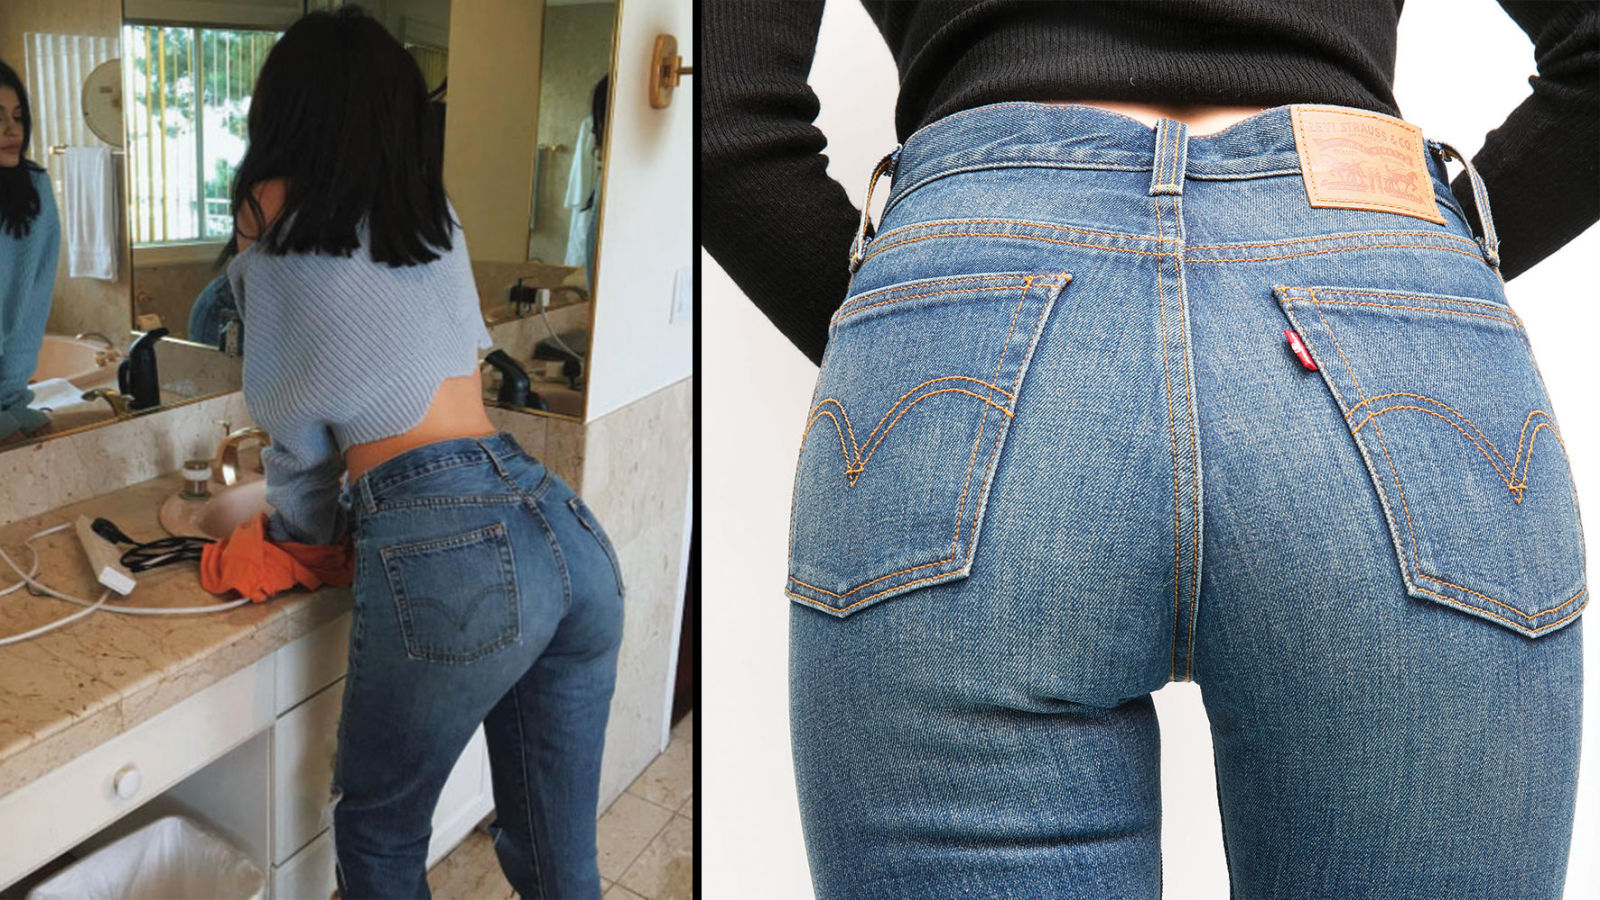 balus holden recommends Ass In Them Jeans